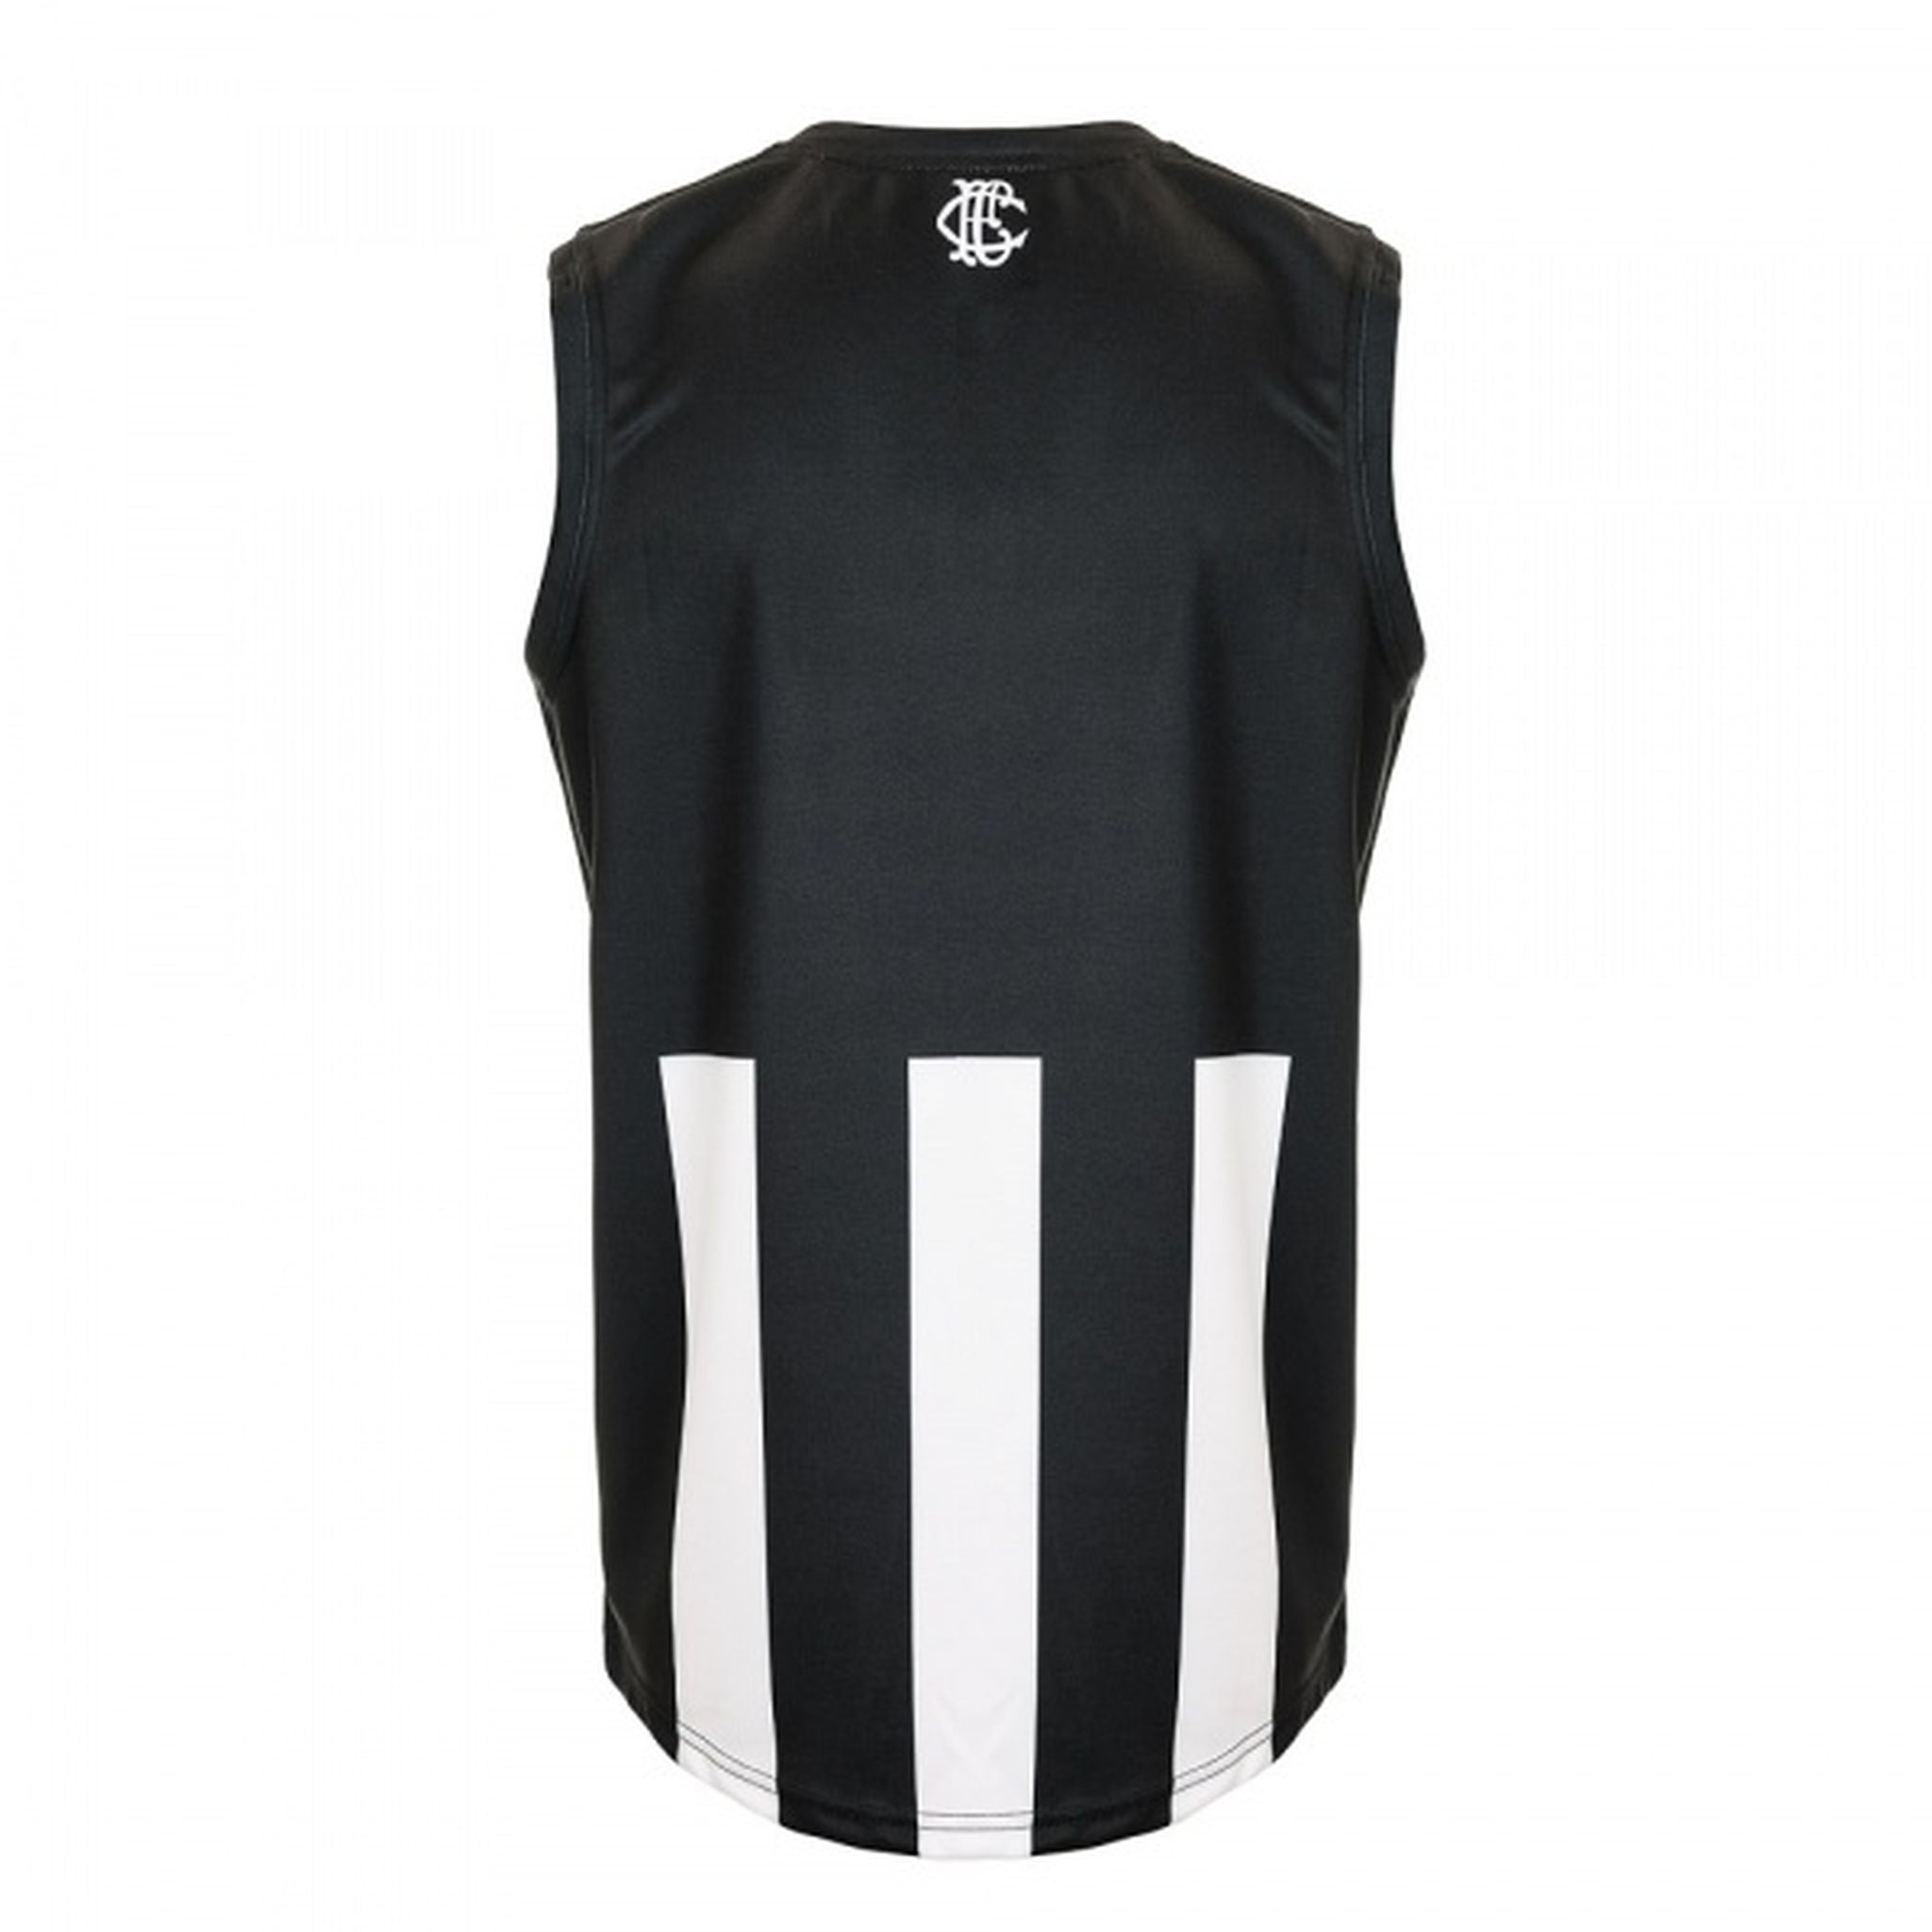 Burley Collingwood Magpies AFL Home Kids Replica Guernsey